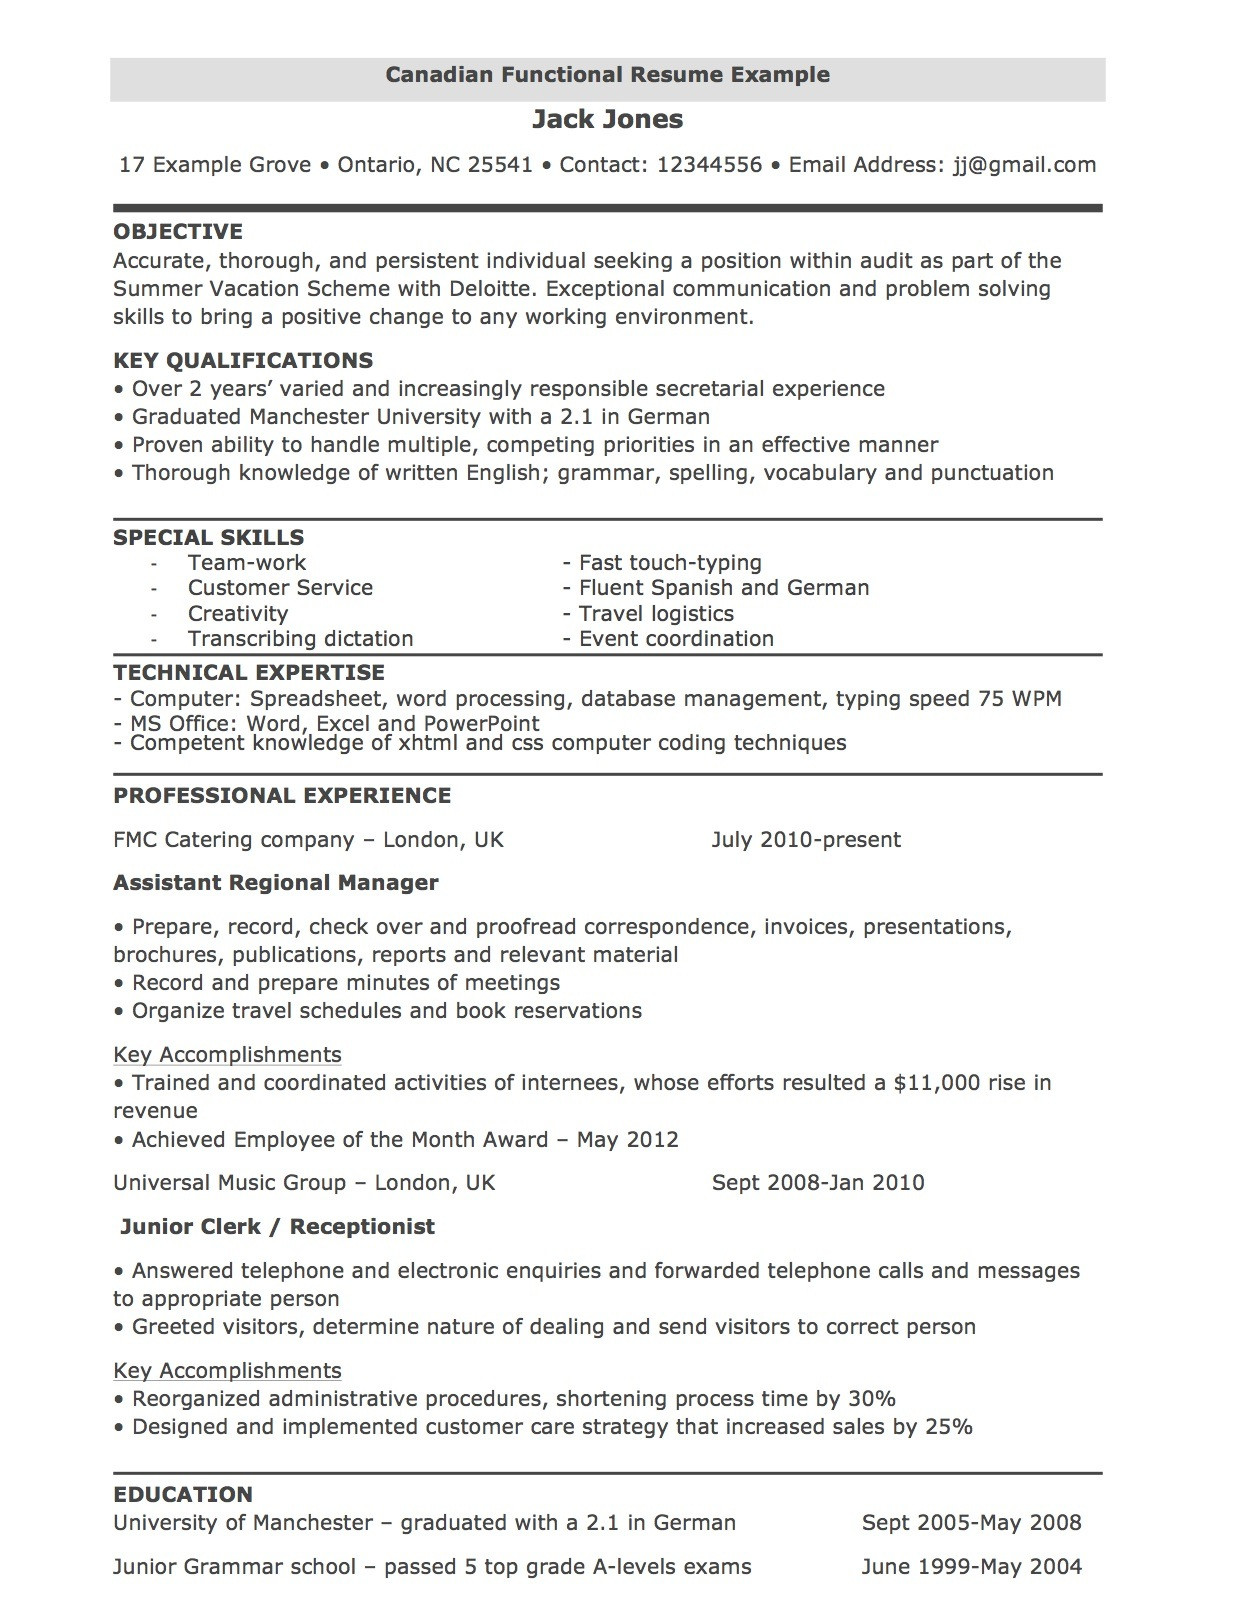 canadian resume template word